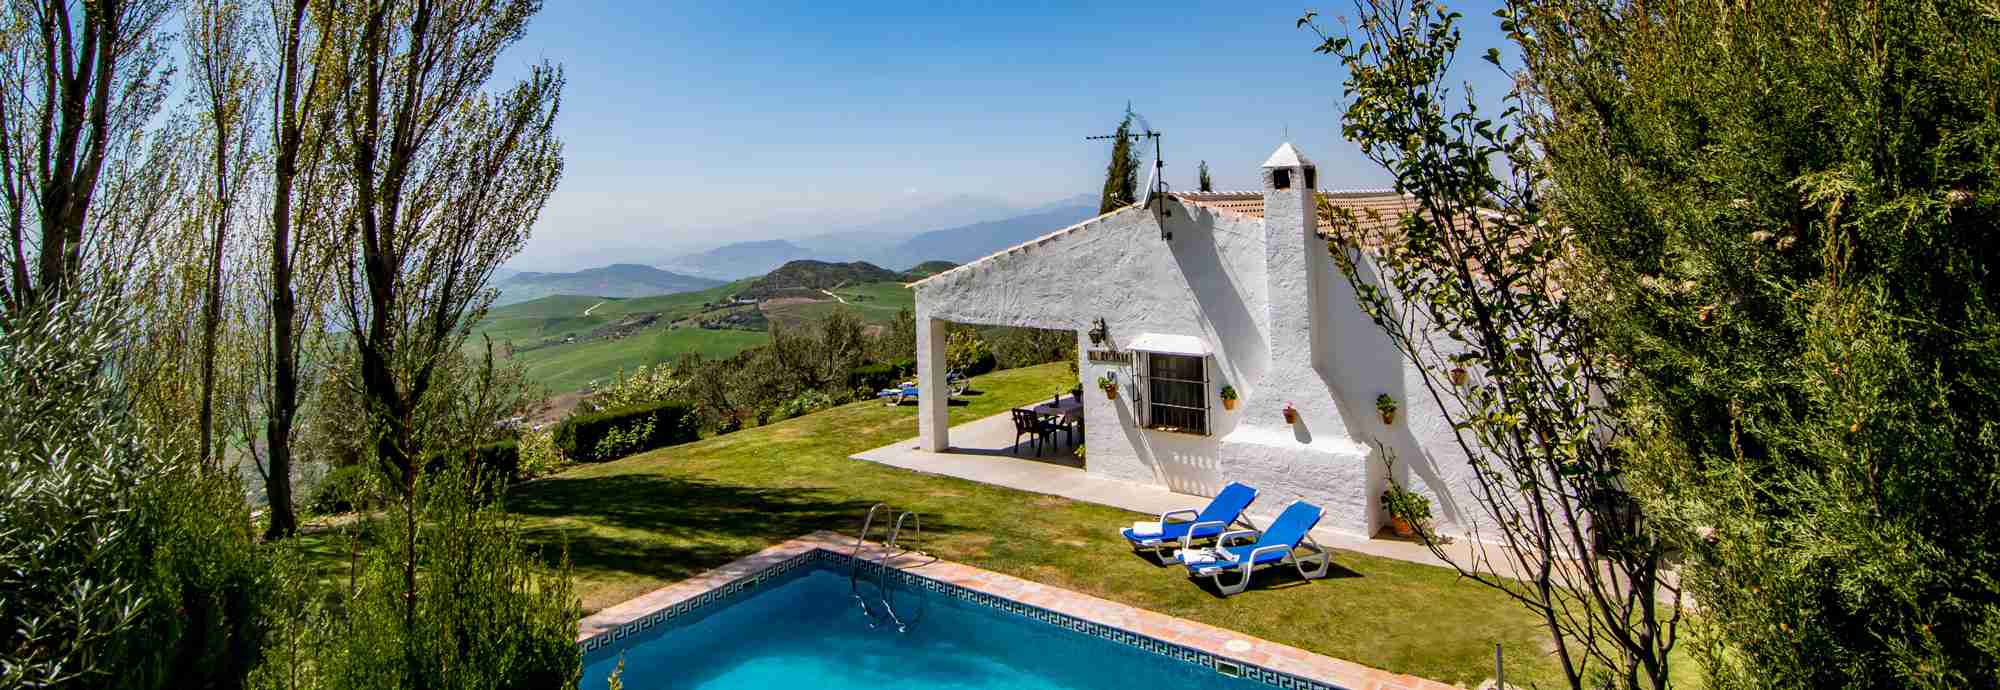 Villa rental with private pool in Antequera, the heart of Andalucia